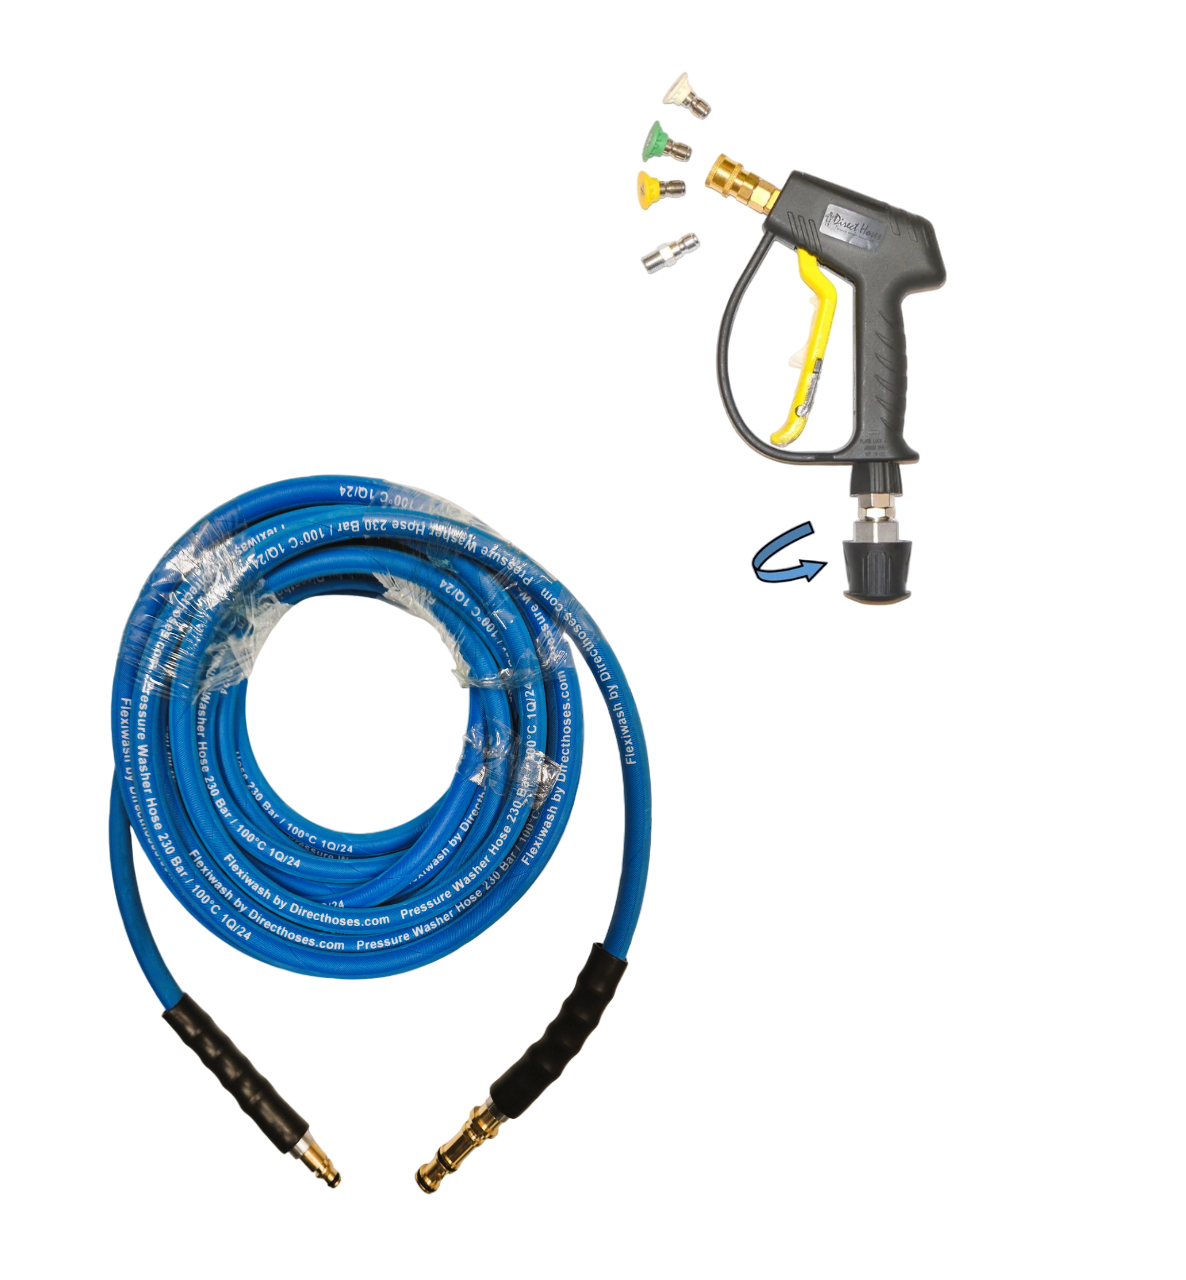 Nilfisk style Hose Reel series FLEXIWASH Hose with Short Trigger with Quick fit Nozzles for Hose Reel connection